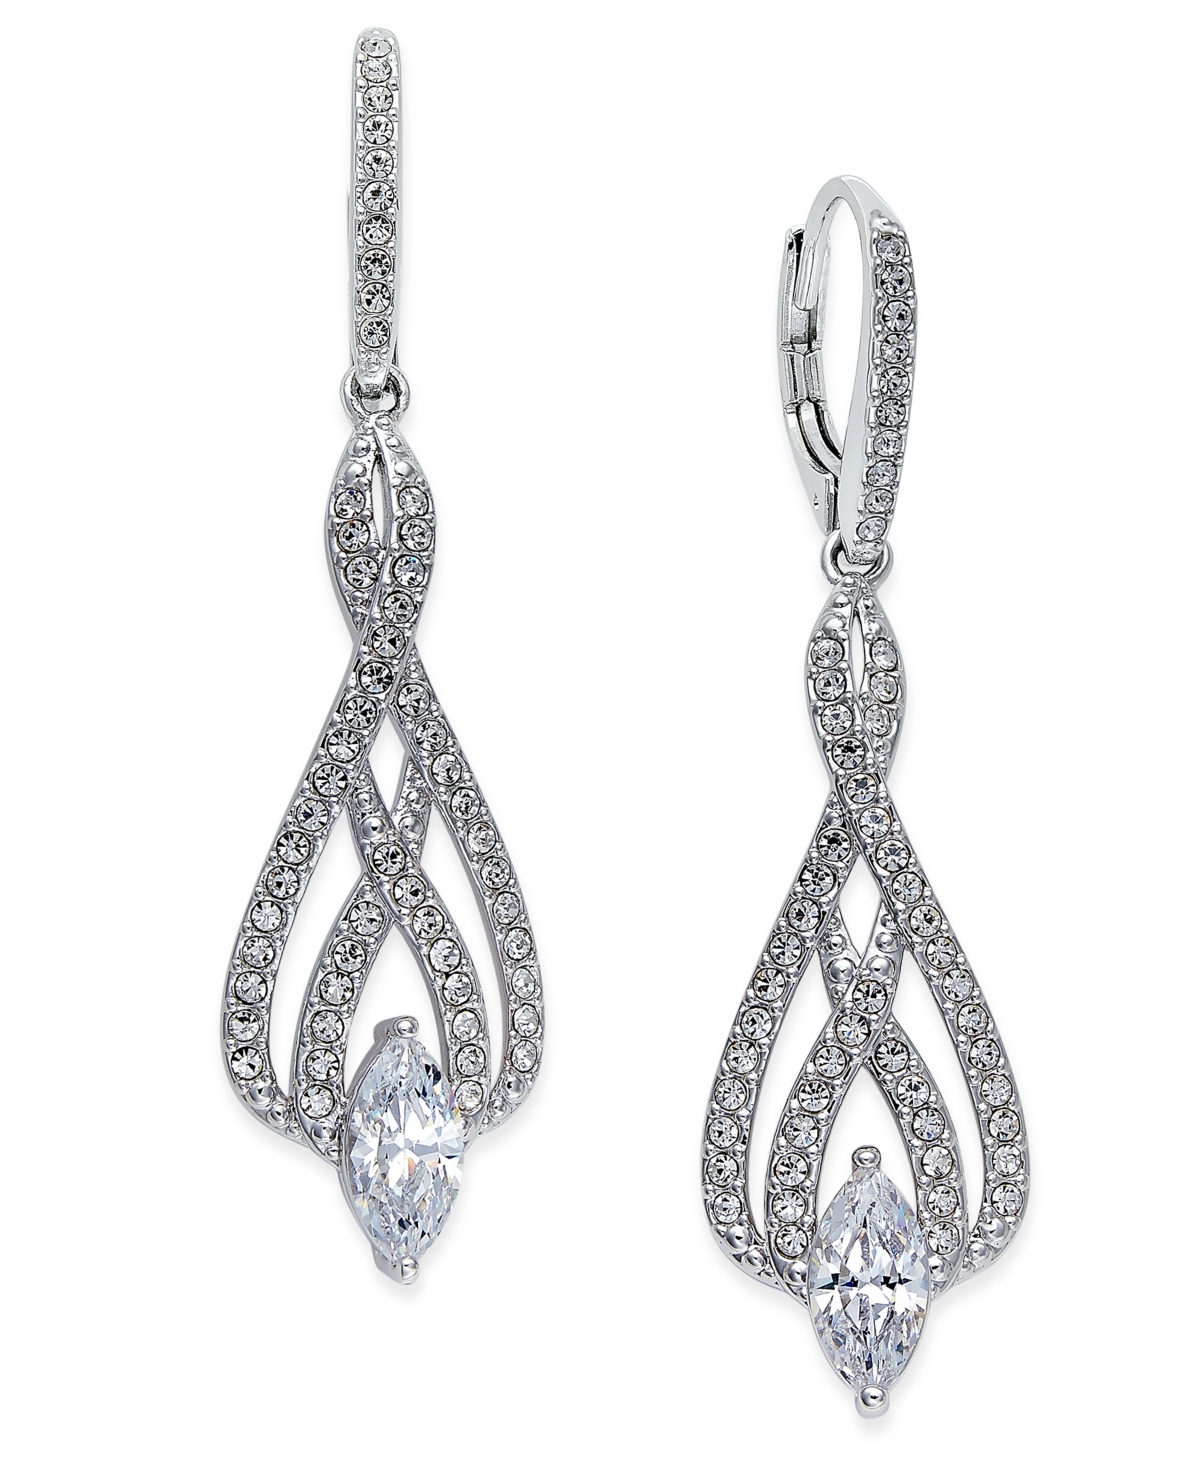 Silver-Tone Marquise Crystal and Pave Drop Earrings, Created for Macy's - Silver